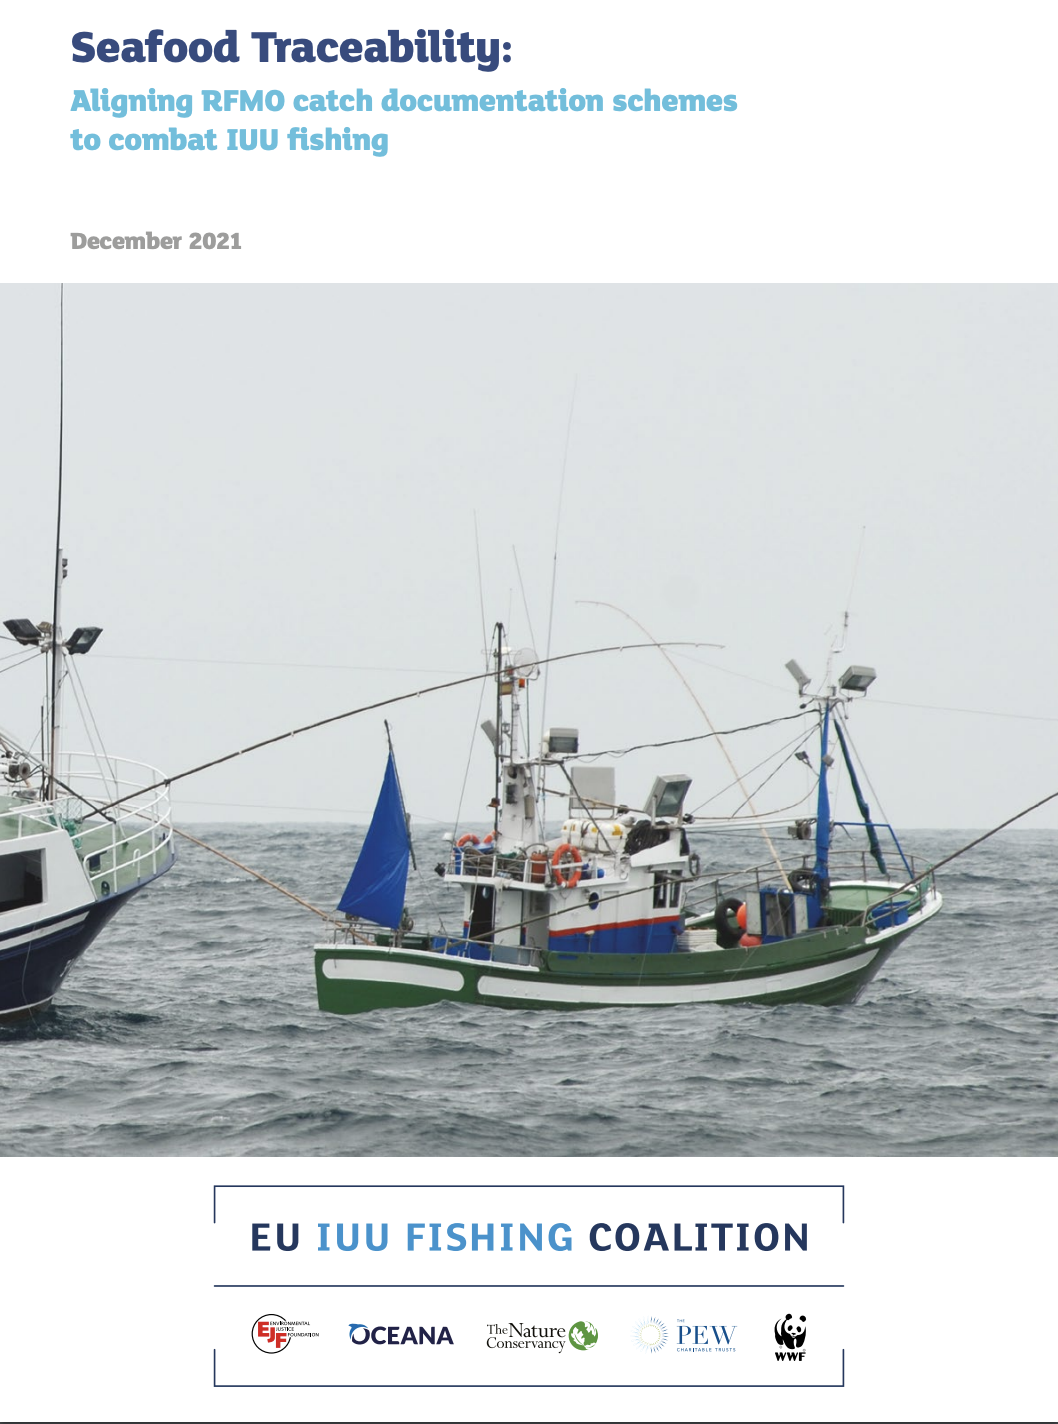 Seafood traceability: Aligning RFMO catch documentation schemes to combat IUU fishing